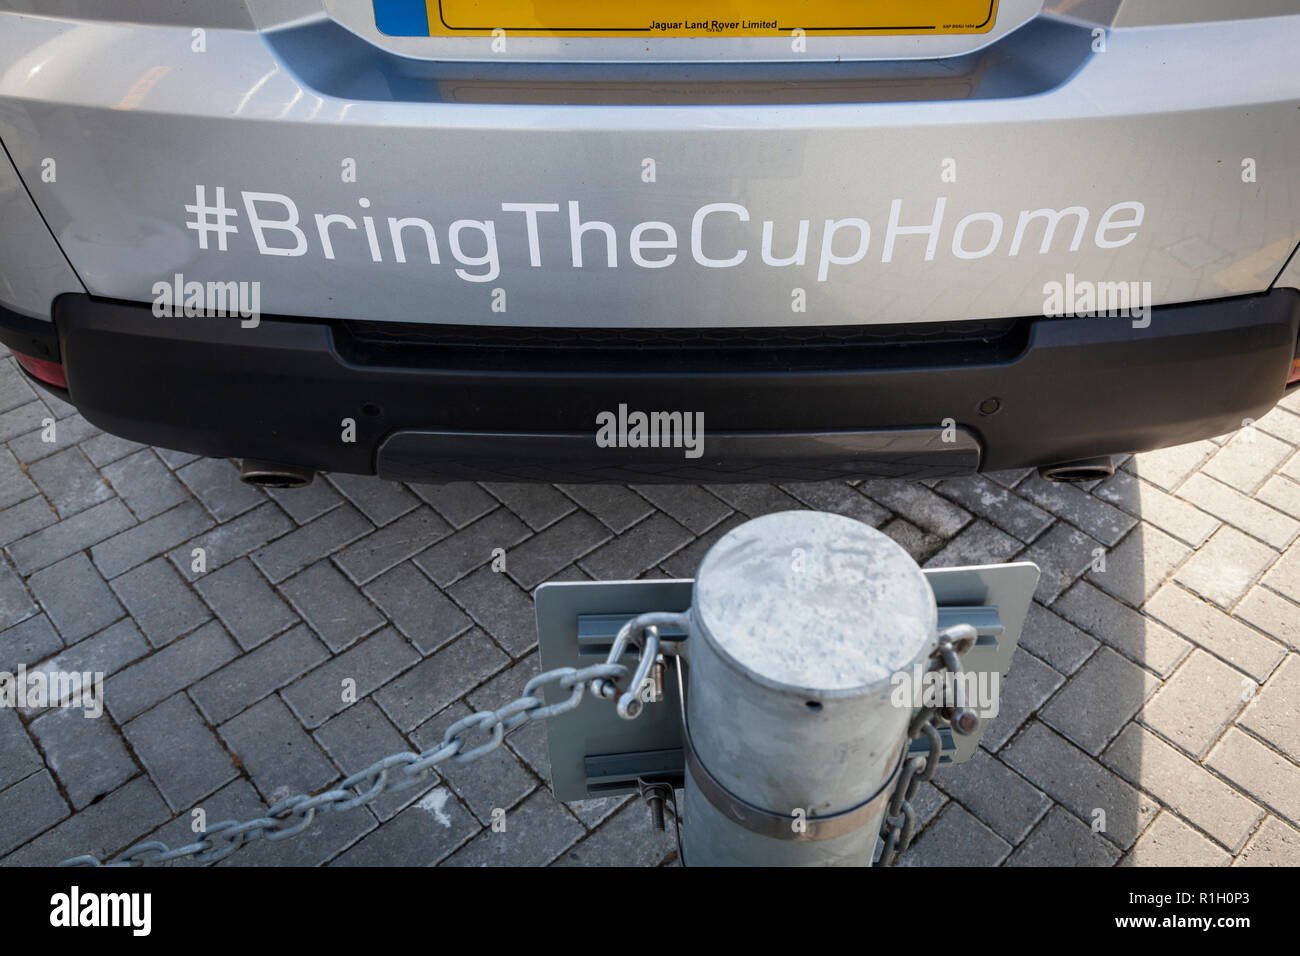 Close-up of the rear bumper sticker of a Land Rover supporting the 2017 UK America's Cup team to 'bring the cup home'. Stock Photo